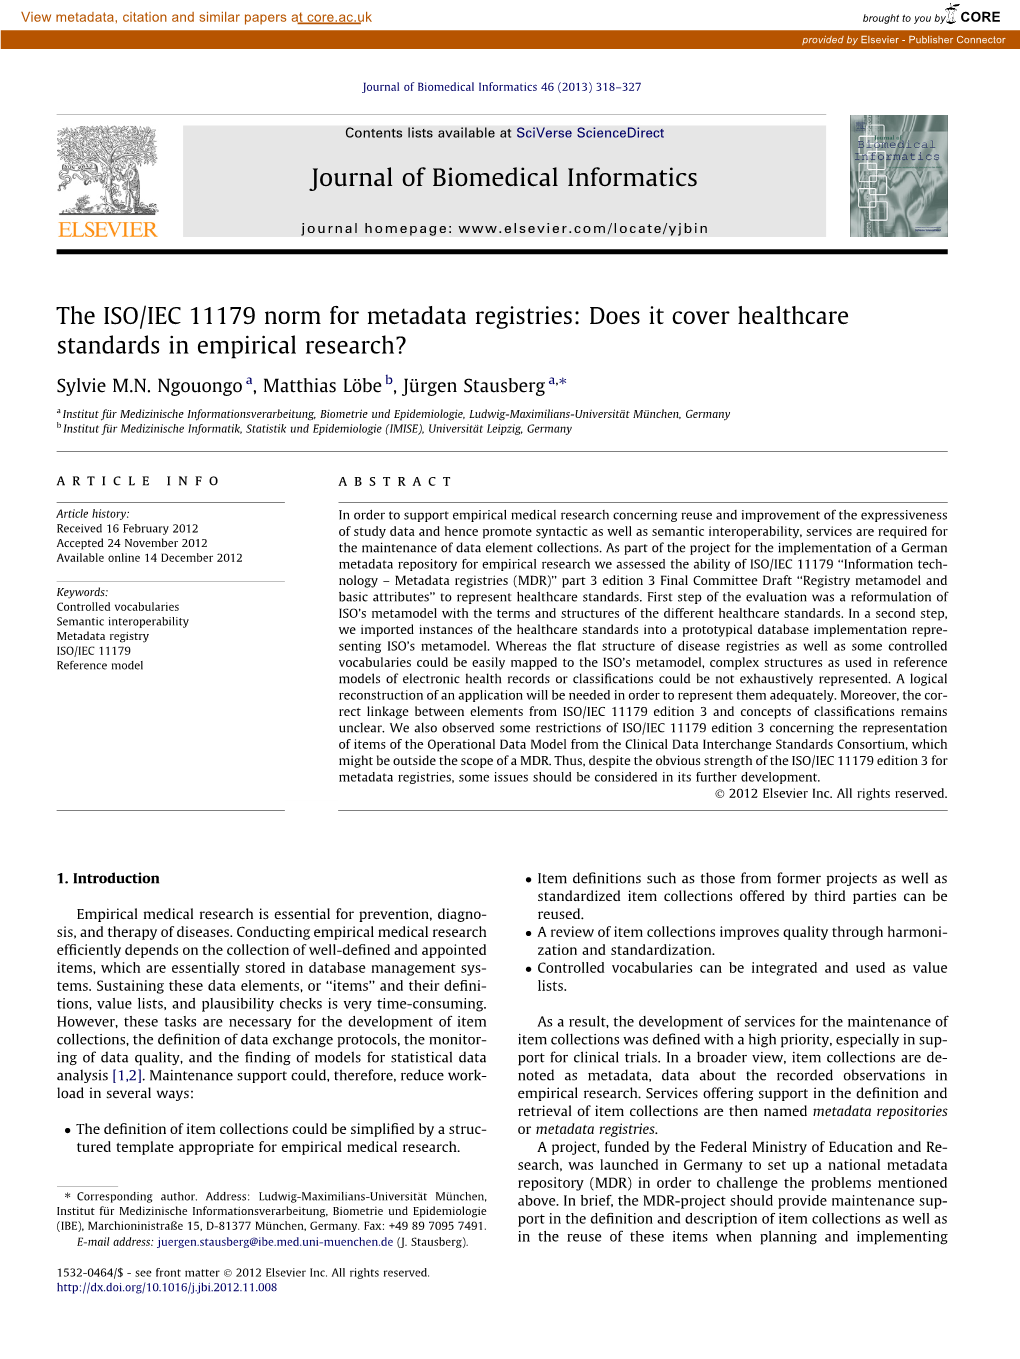 The ISO/IEC 11179 Norm for Metadata Registries: Does It Cover Healthcare Standards in Empirical Research? ⇑ Sylvie M.N